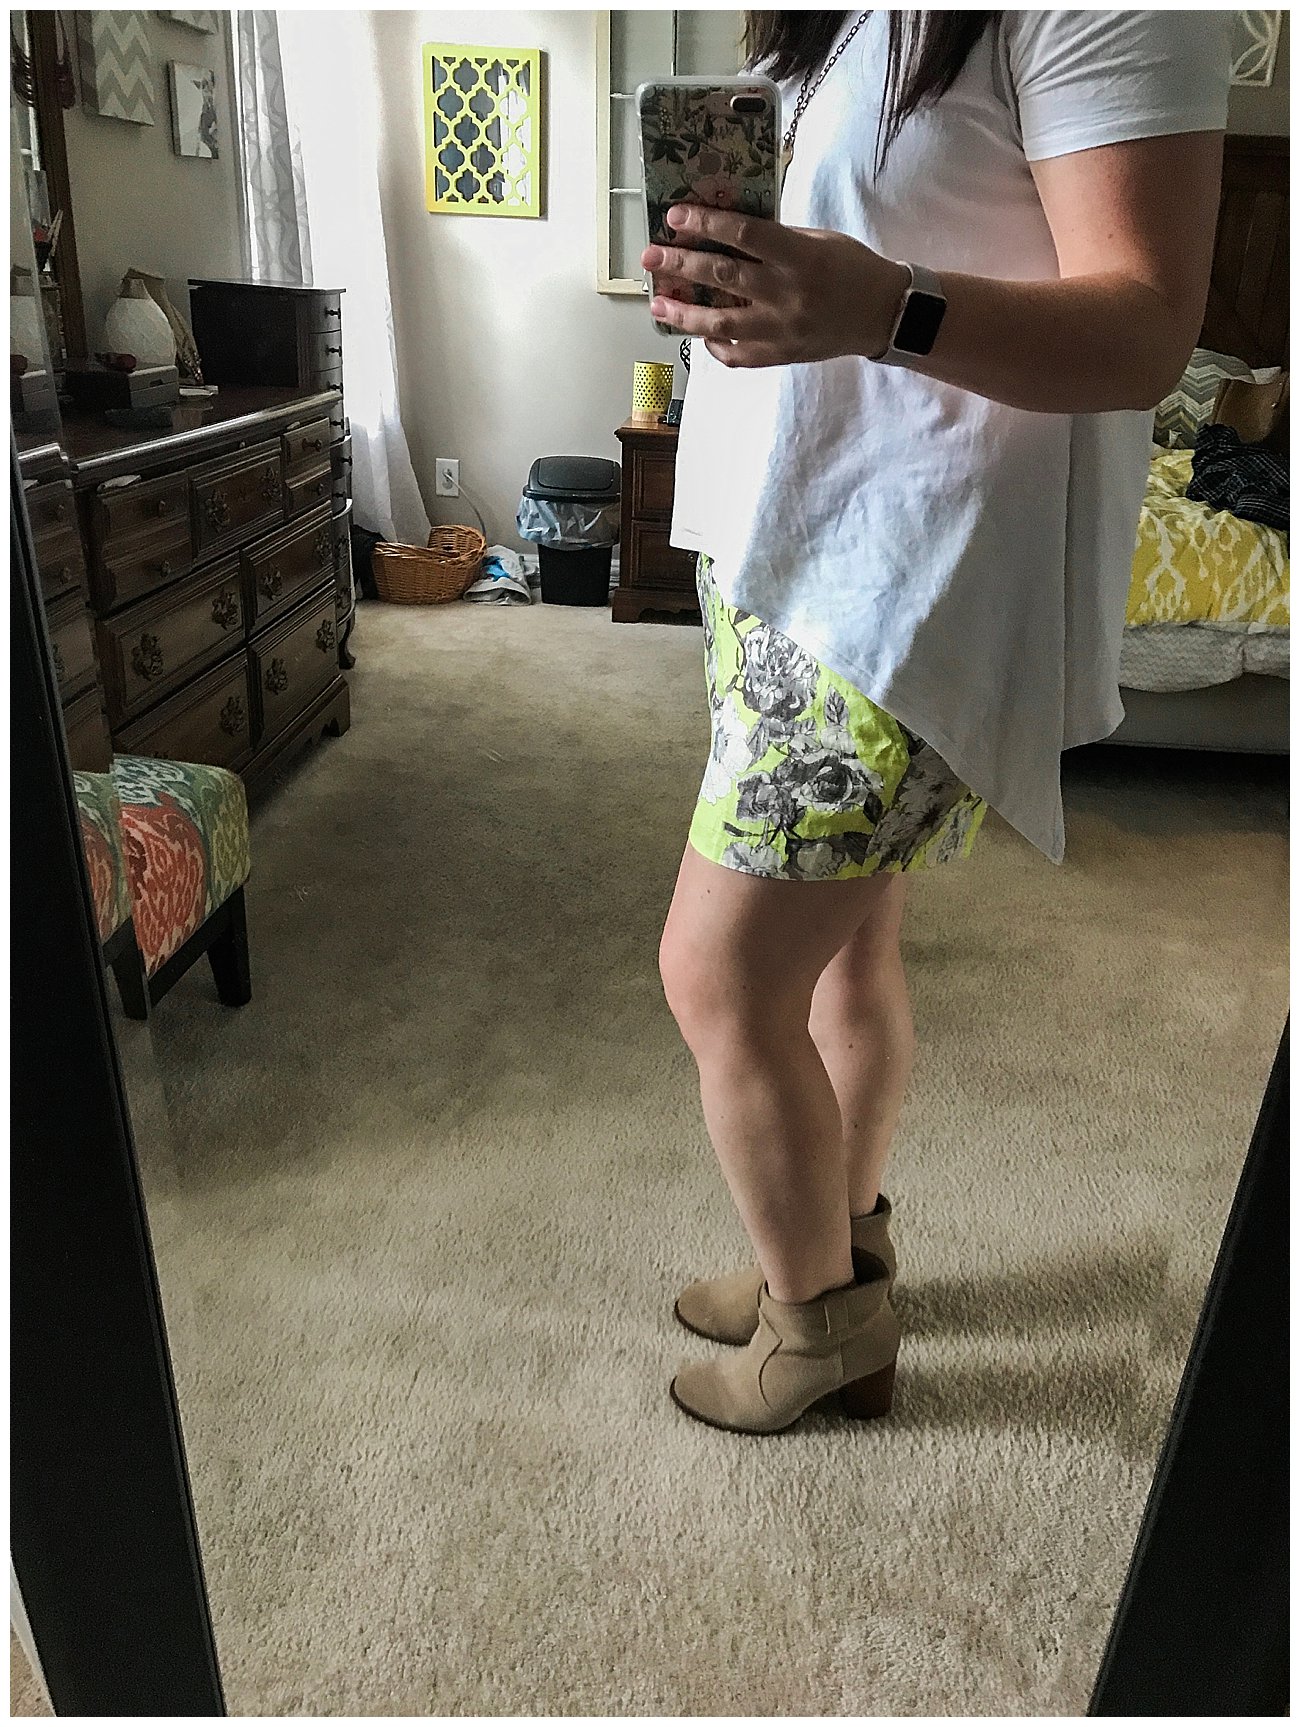 Shorts & Athleticwear Fix - Stitch Fix Review by NC ethical fashion blogger Still Being Molly